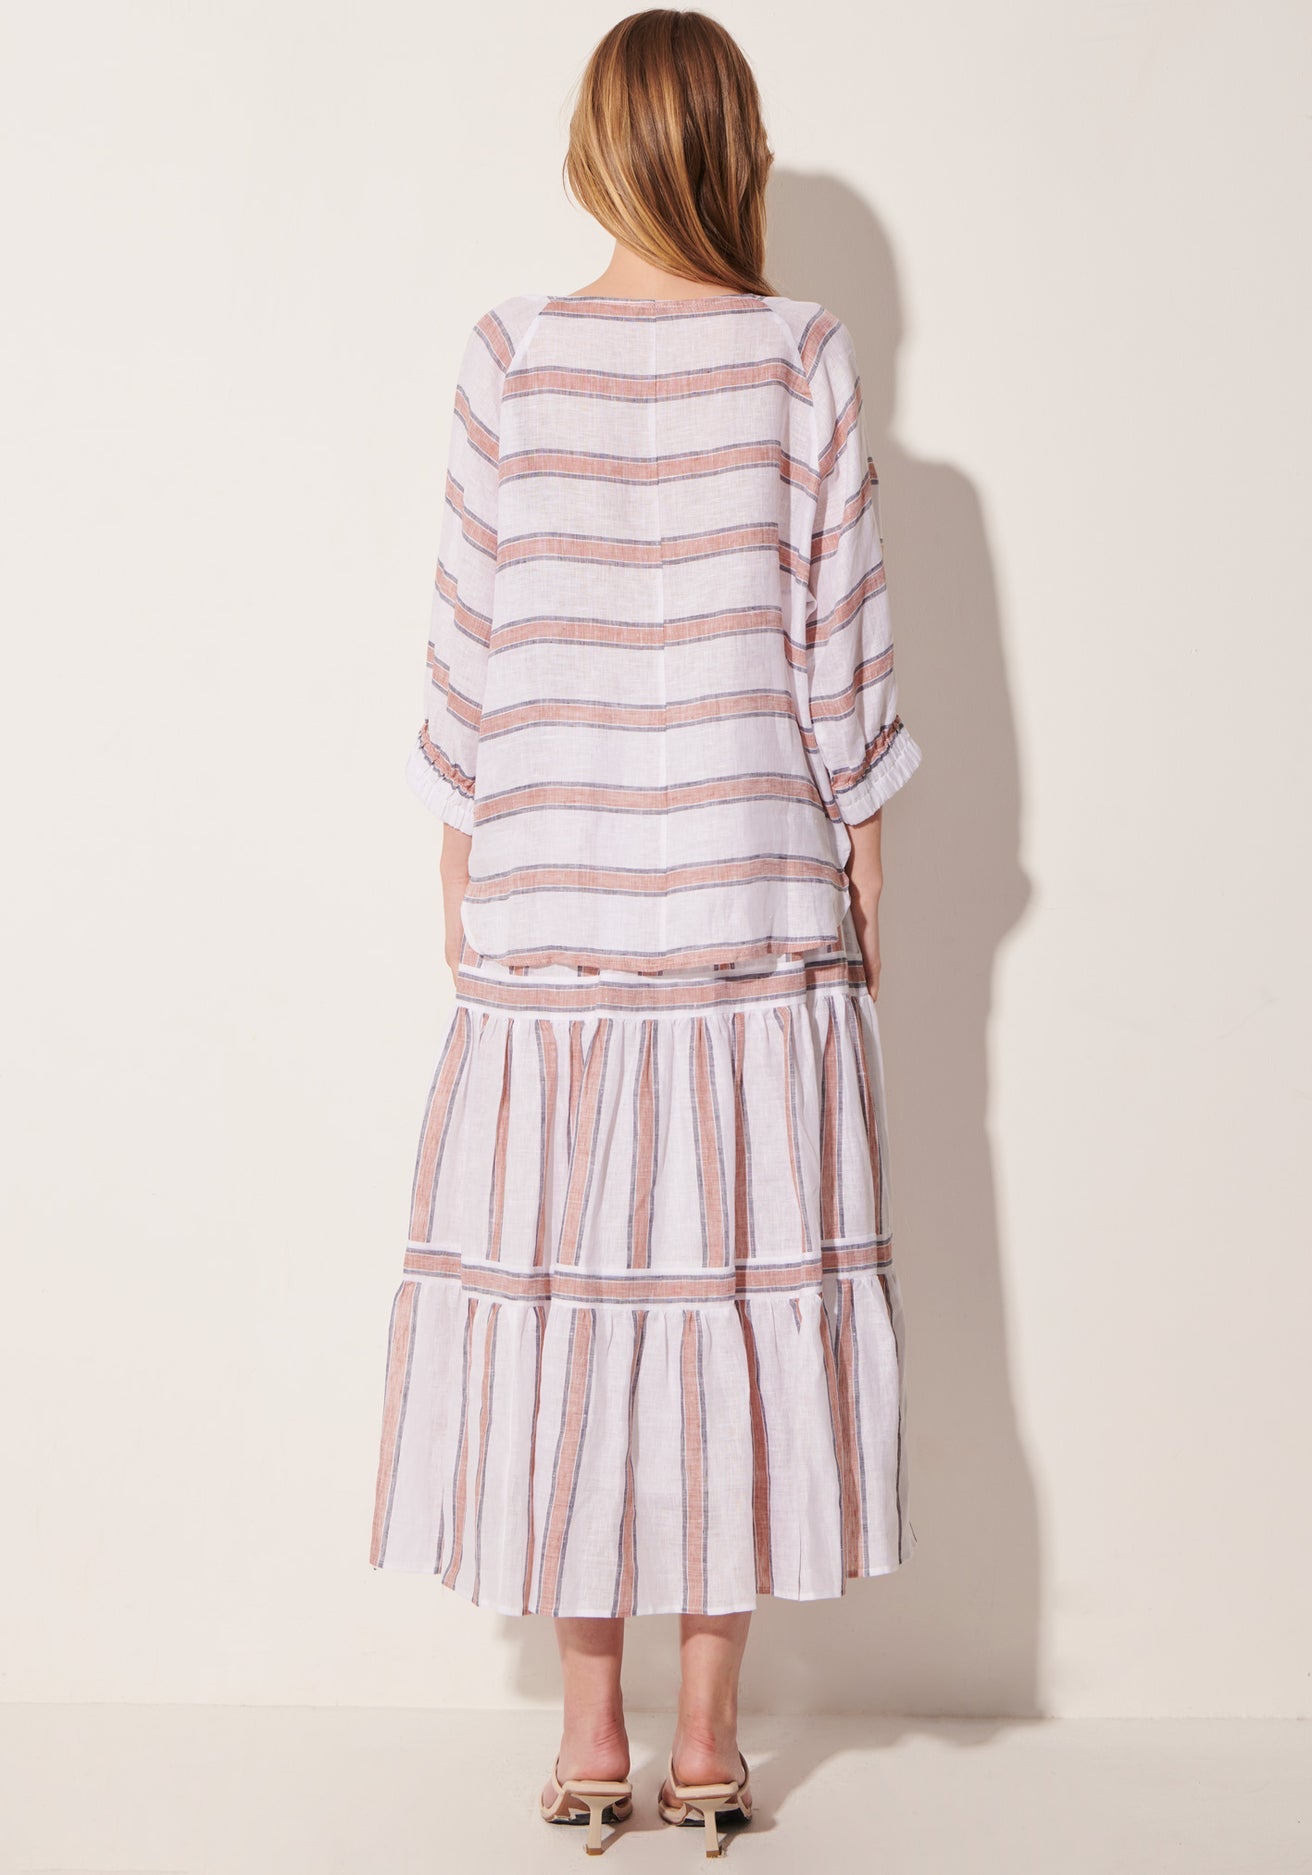 Florence Top in Florence Stripe